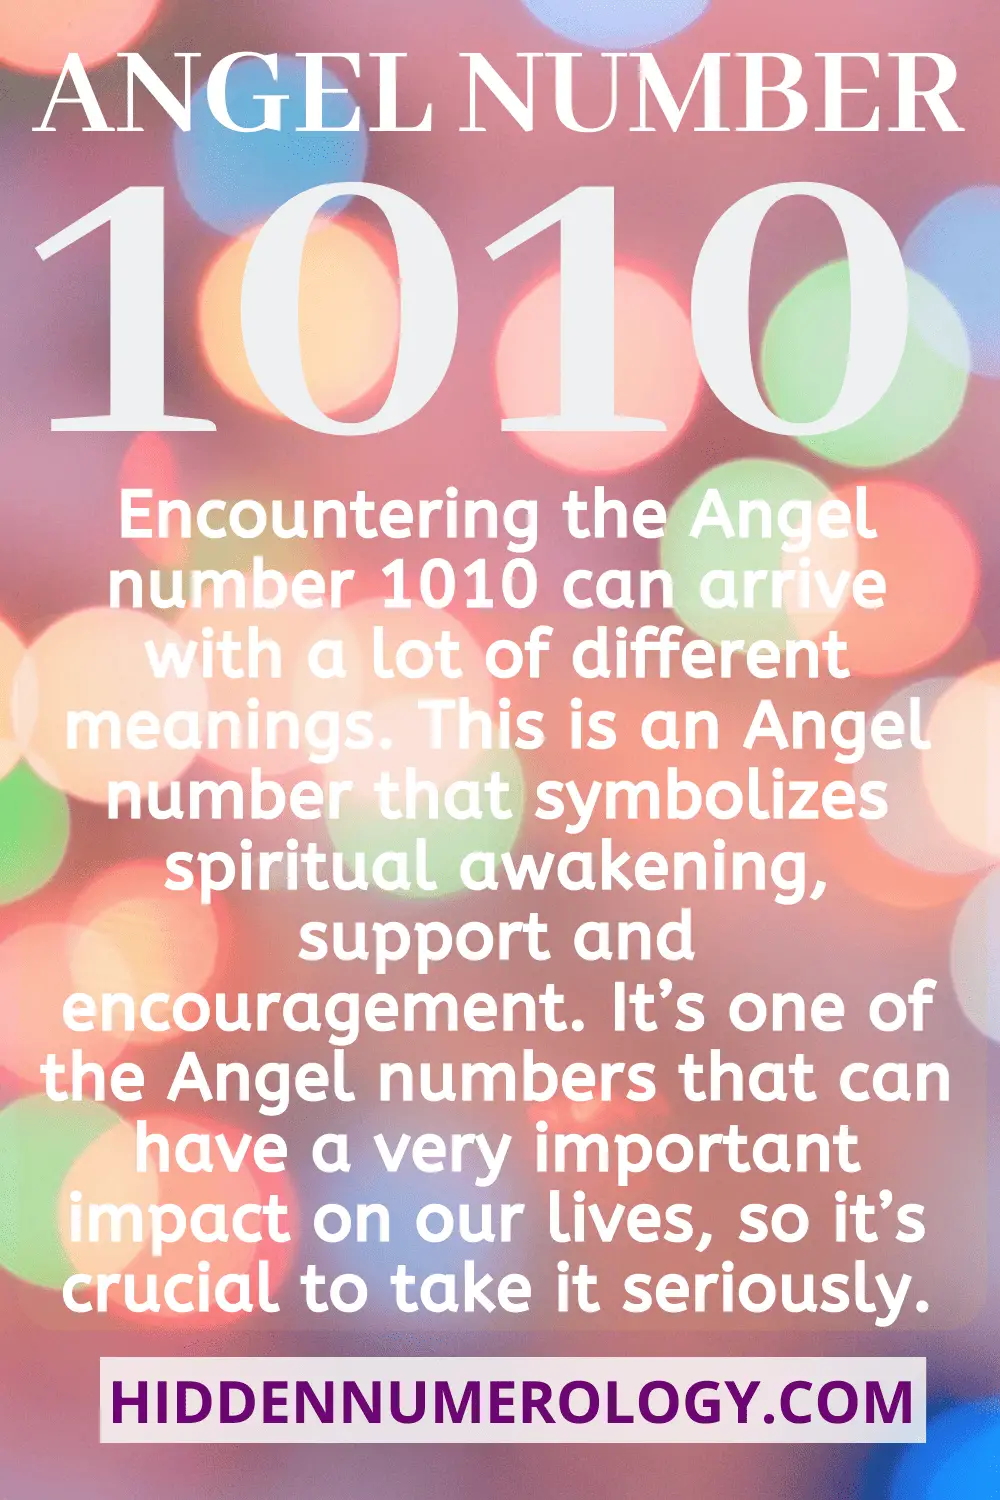 What Does 10 10 Mean Spiritually?